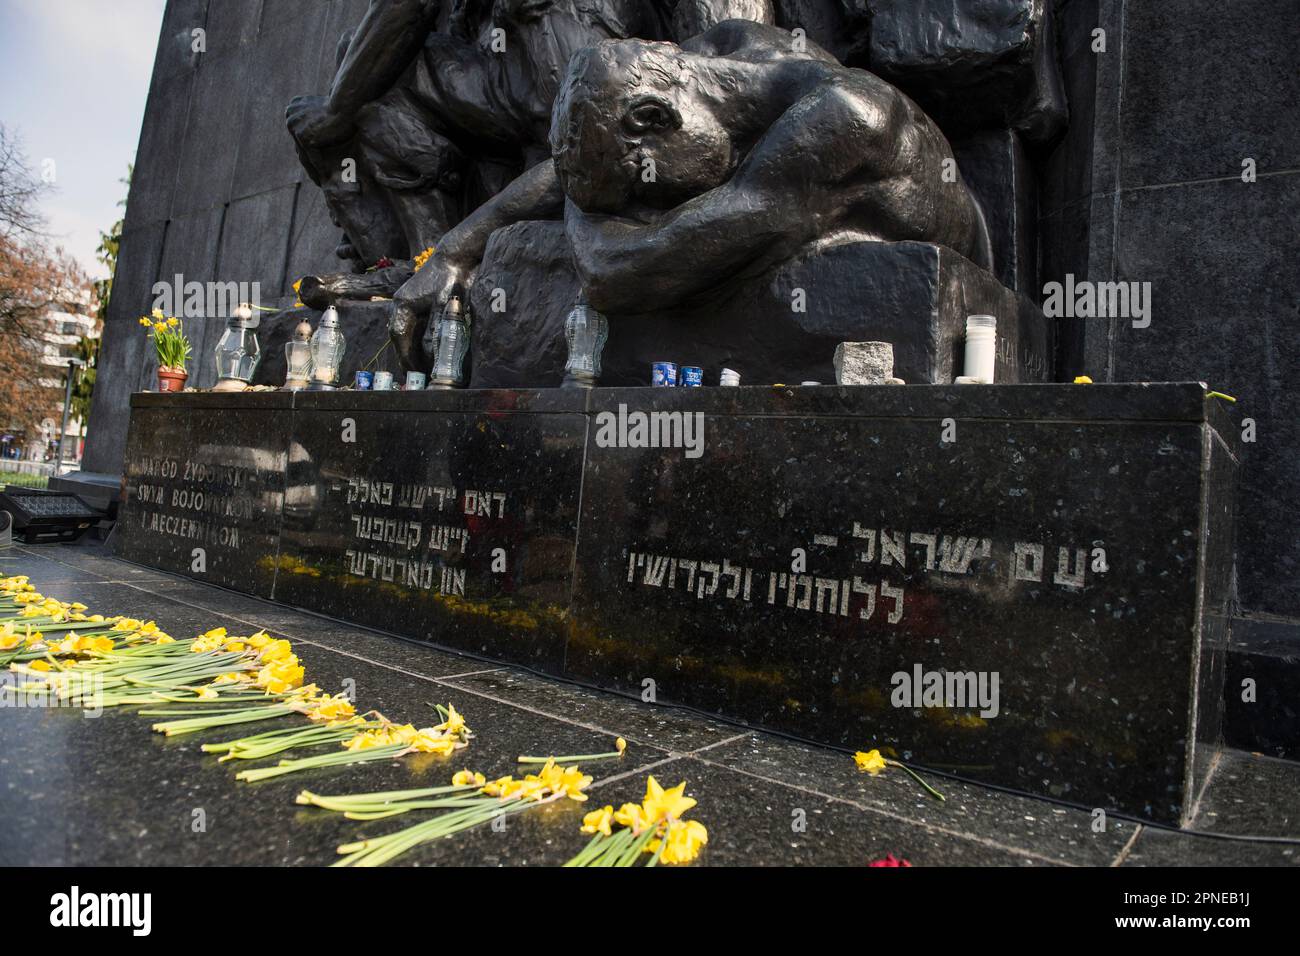 Warsaw, Mazowieckie, Poland. 18th Apr, 2023. The Monument to the Ghetto Heroes commemorates Jewish insurgents from the Warsaw Ghetto, which lasted from 19 April 1943 to 16 May 1943. This year April 19, the world will mark the 80th anniversary of the Warsaw Ghetto Uprising ""“ the first large-scale metropolitan uprising in Nazi-occupied Europe. The Uprising became an everlasting symbol of the resistance of Polish Jews against the Holocaust. Between 1942 to 1943 Germans transported over 300,000 Jews from the Warsaw Ghetto to the death camp in Treblinka and other camps.A day before the official Stock Photo